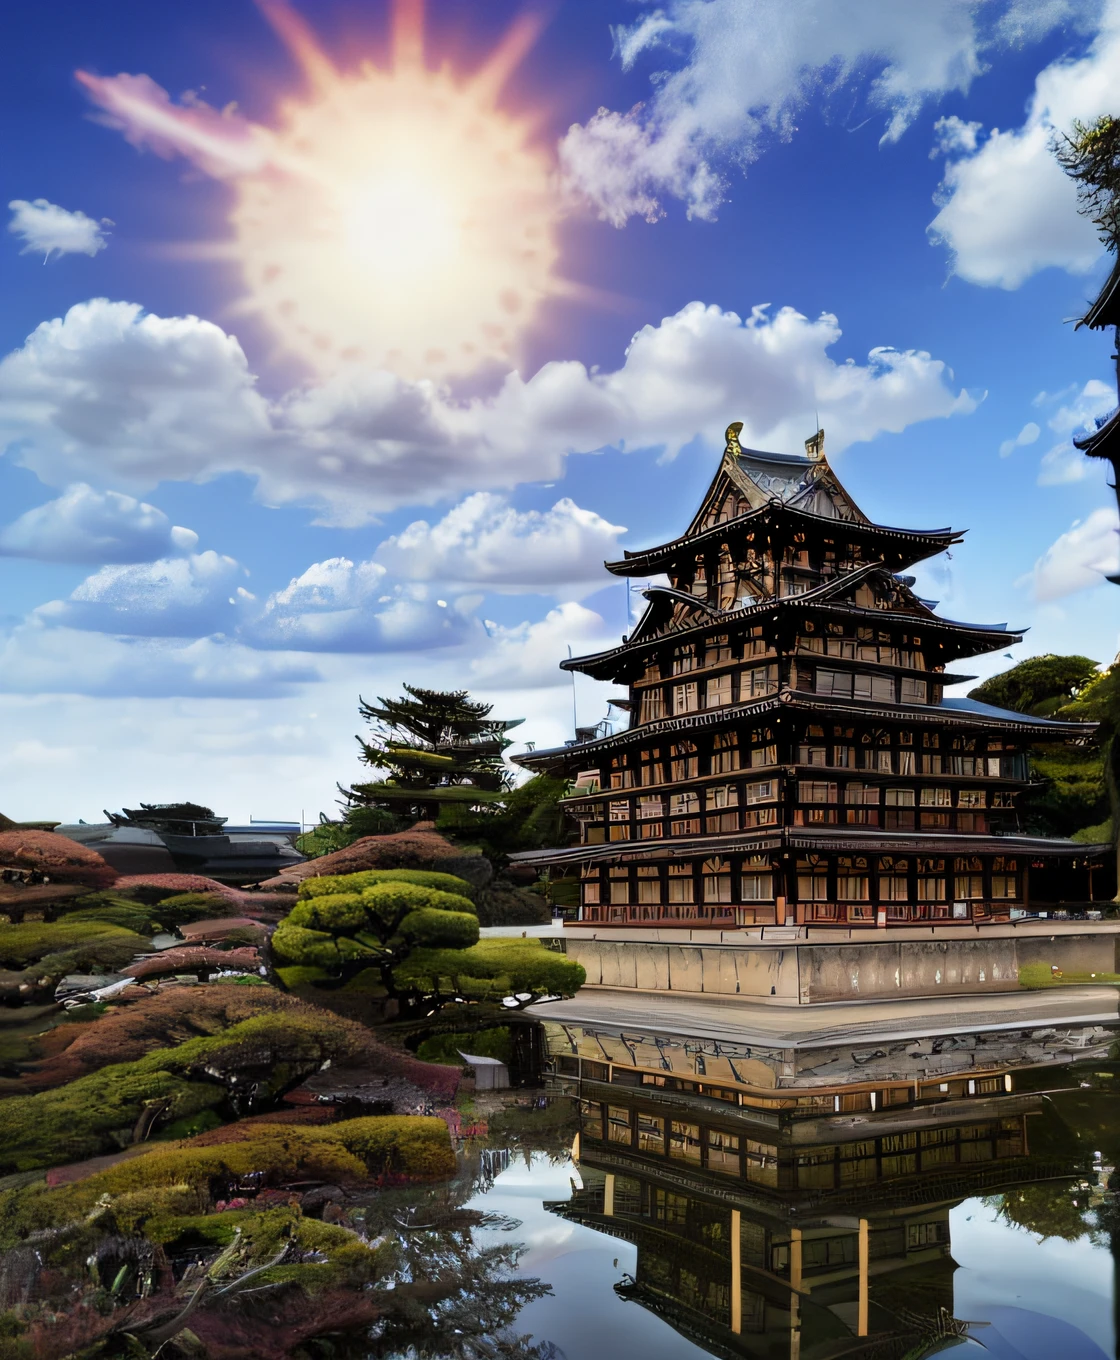 ​masterpiece、top-quality、hightquality、the Extremely Detailed CG Unity 8K Wallpapers、1pc、（1 castle）、Warring states period　ighly detailed、Nagoya Castle、Himeji Castle、Kumamoto Castle、Egret City、Edo Castle、Japan castle、outside of house、Skysky、​​clouds、natta、No humanont、jpn, moonlights, cinemagraph, landscapes, Eau, The tree, dark sky, falls, cliff, naturey, lake, a river, cloudy ash sky, awardwinning photo, bokeh dof, depth of fields, nffsw, bloom, chromatic abberation, Photorealsitic, ighly detailed, Trending on ArtStation, CGsociety Trends、Complex and、in detail、Dramatic and、